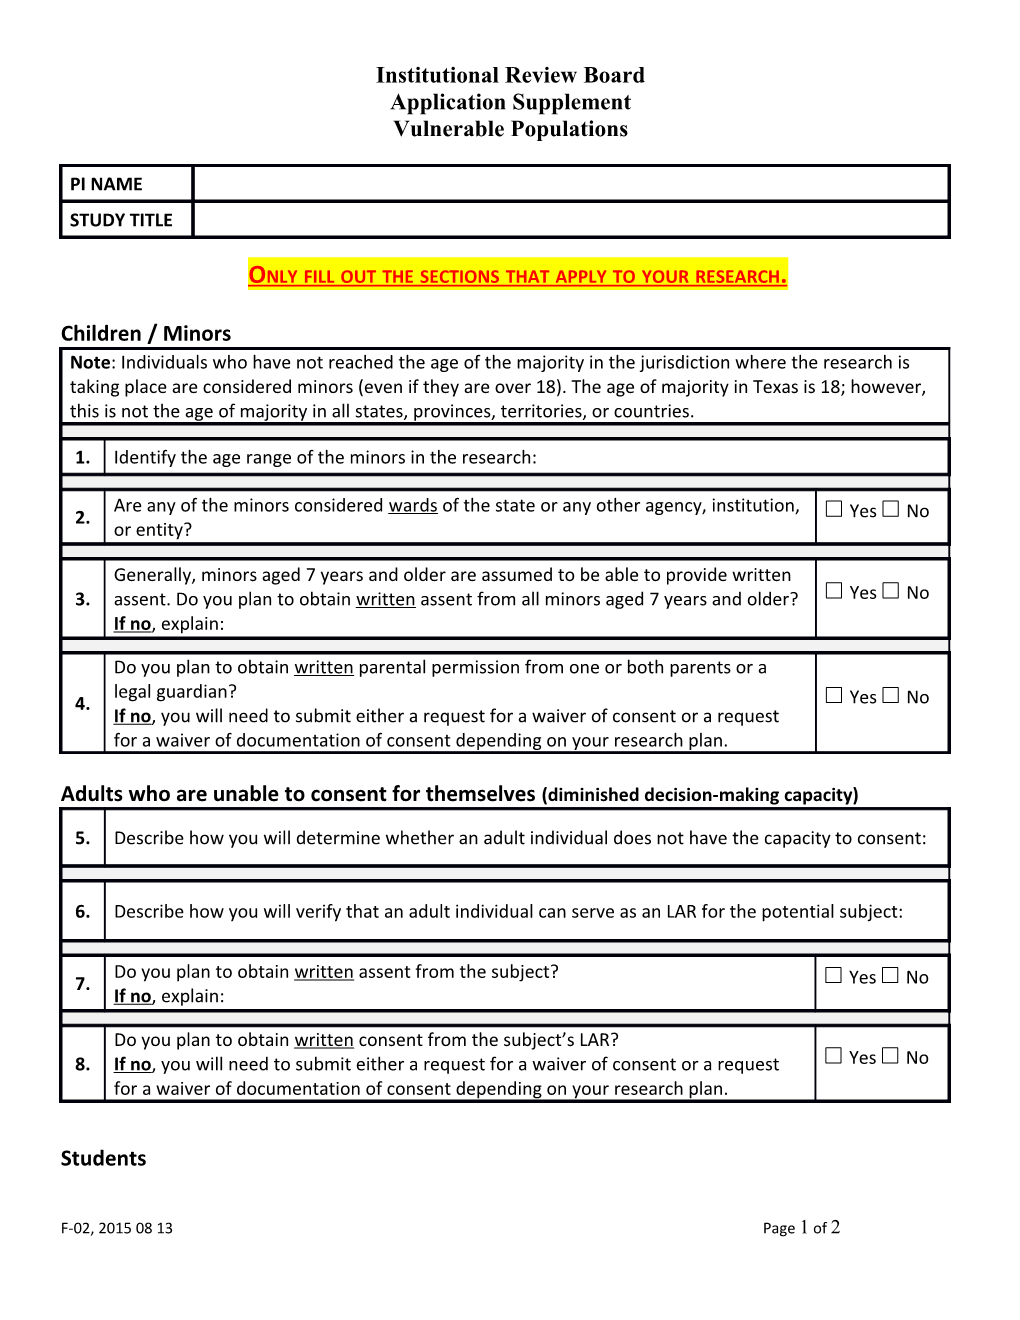 Only Fill out the Sections That Apply to Your Research